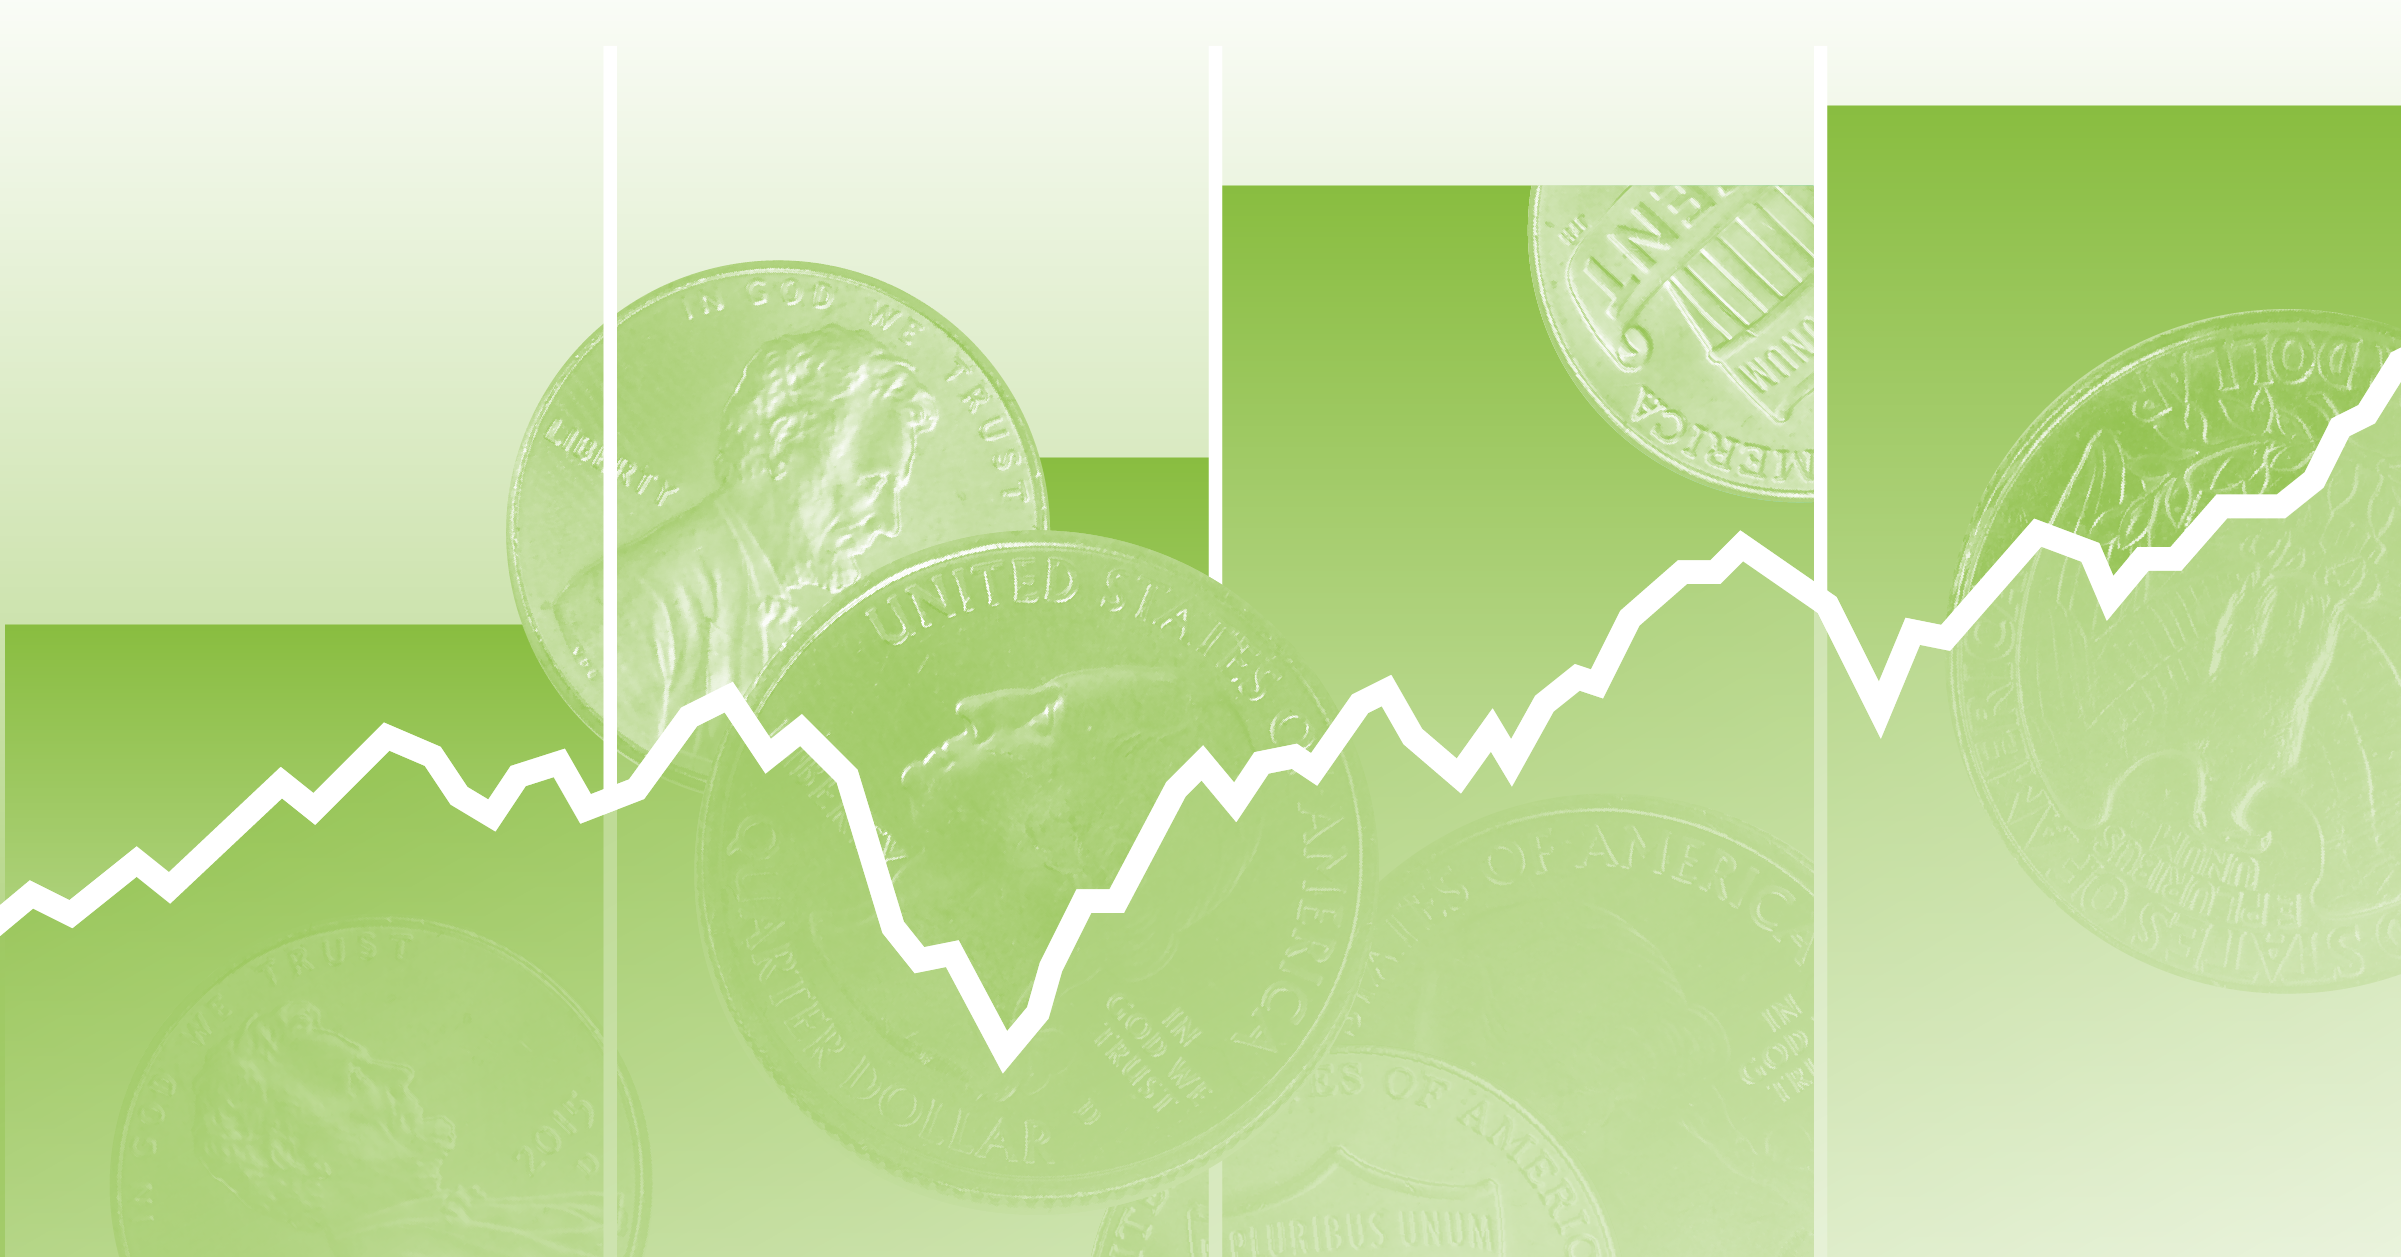 Illustration of a green bar graph with images of U.S. coins and a white line graph on top of the bar graph in front of a light green background depicting increasing dividends